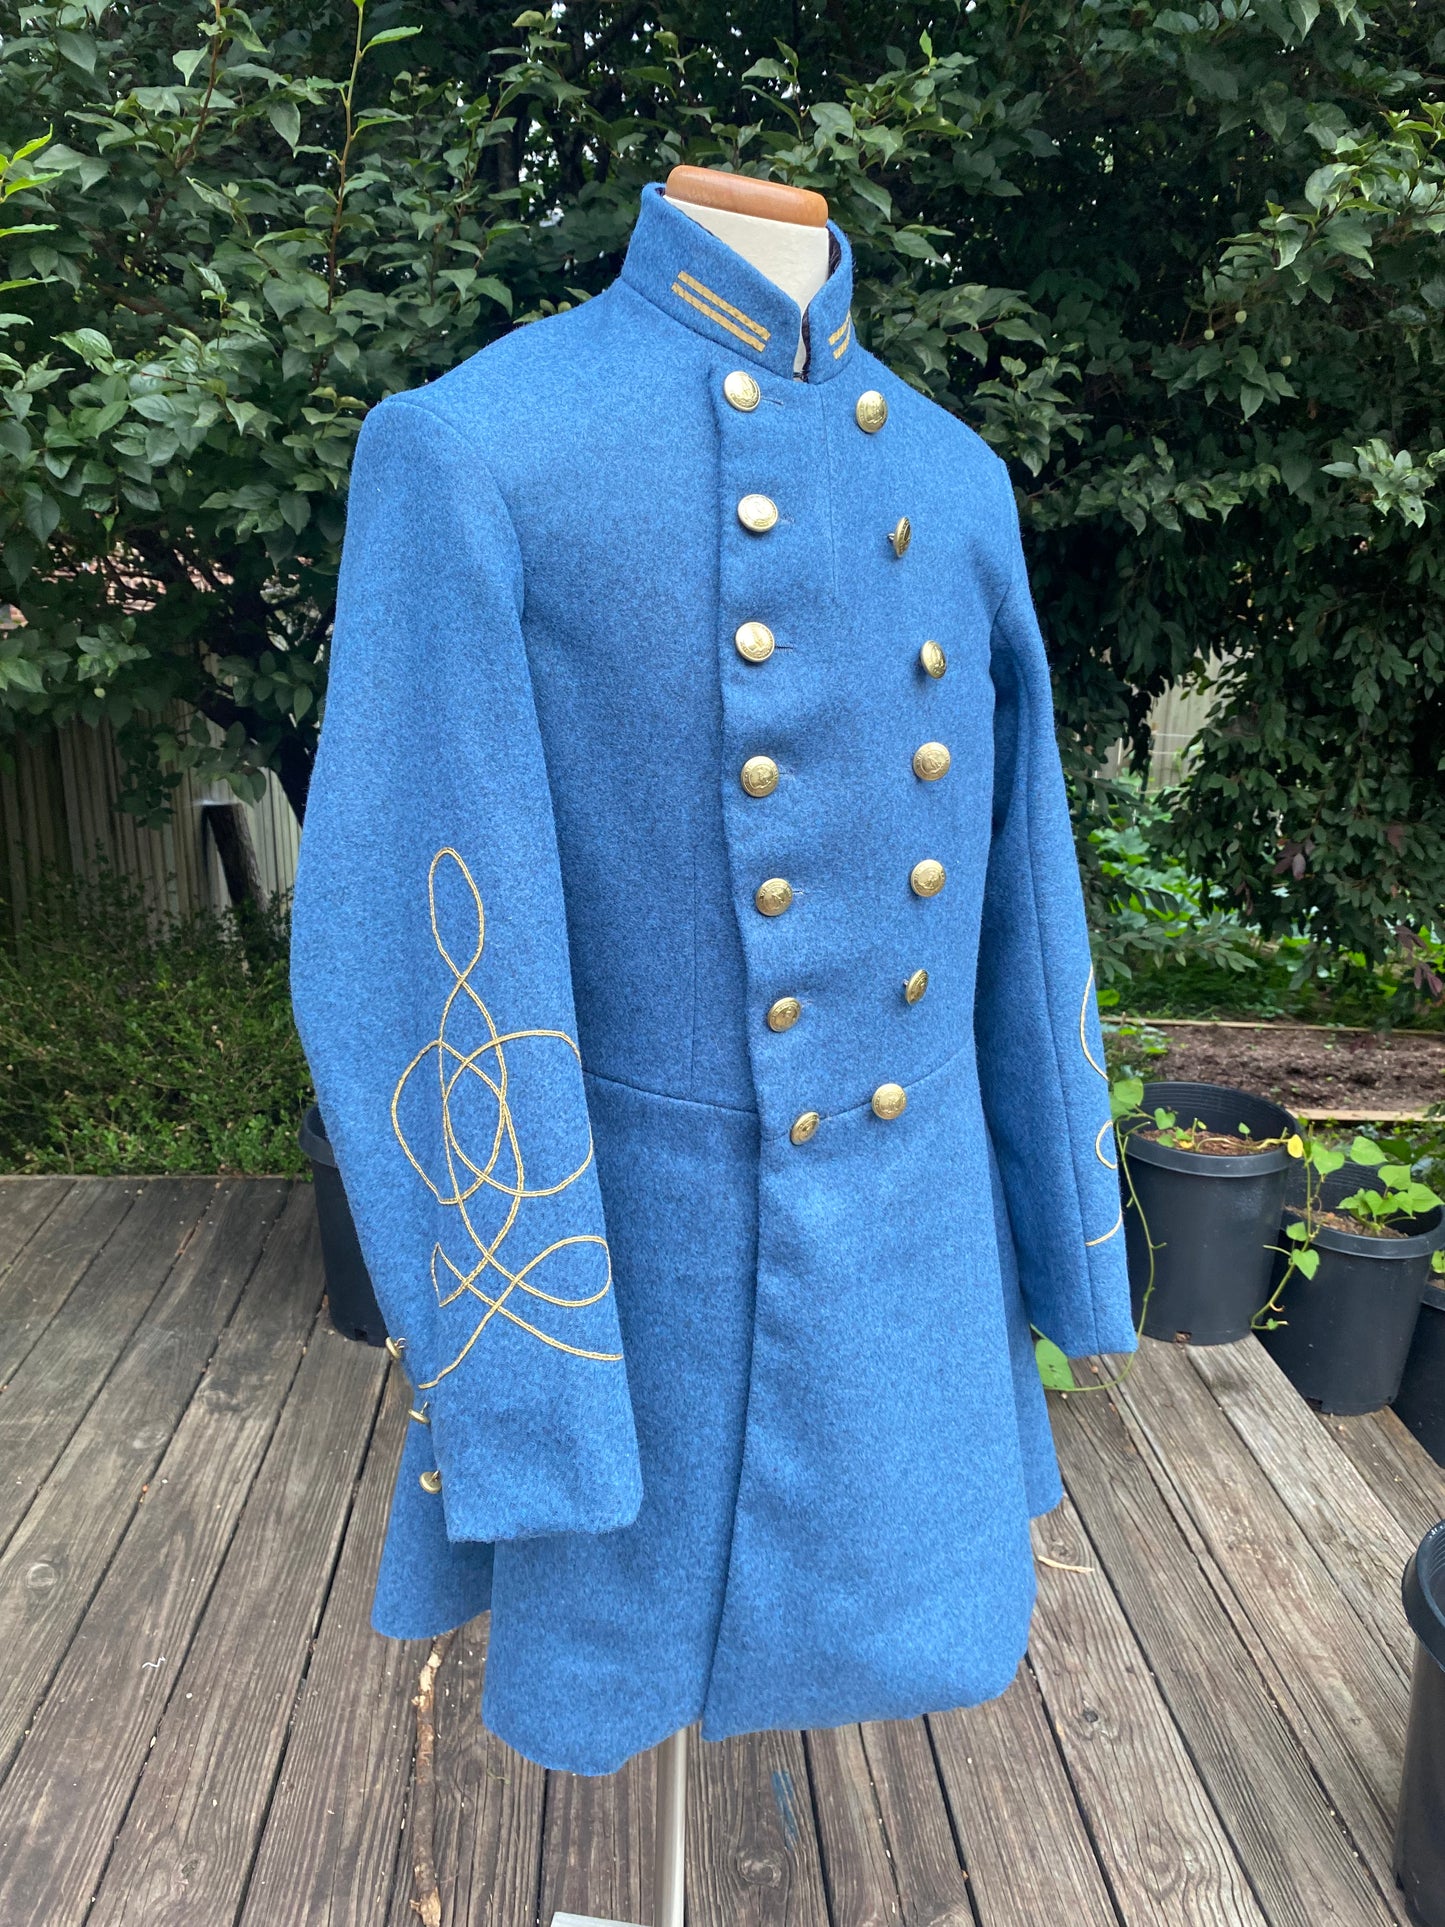 Confederate Officer Frock Coat - Untrimmed Company Grade